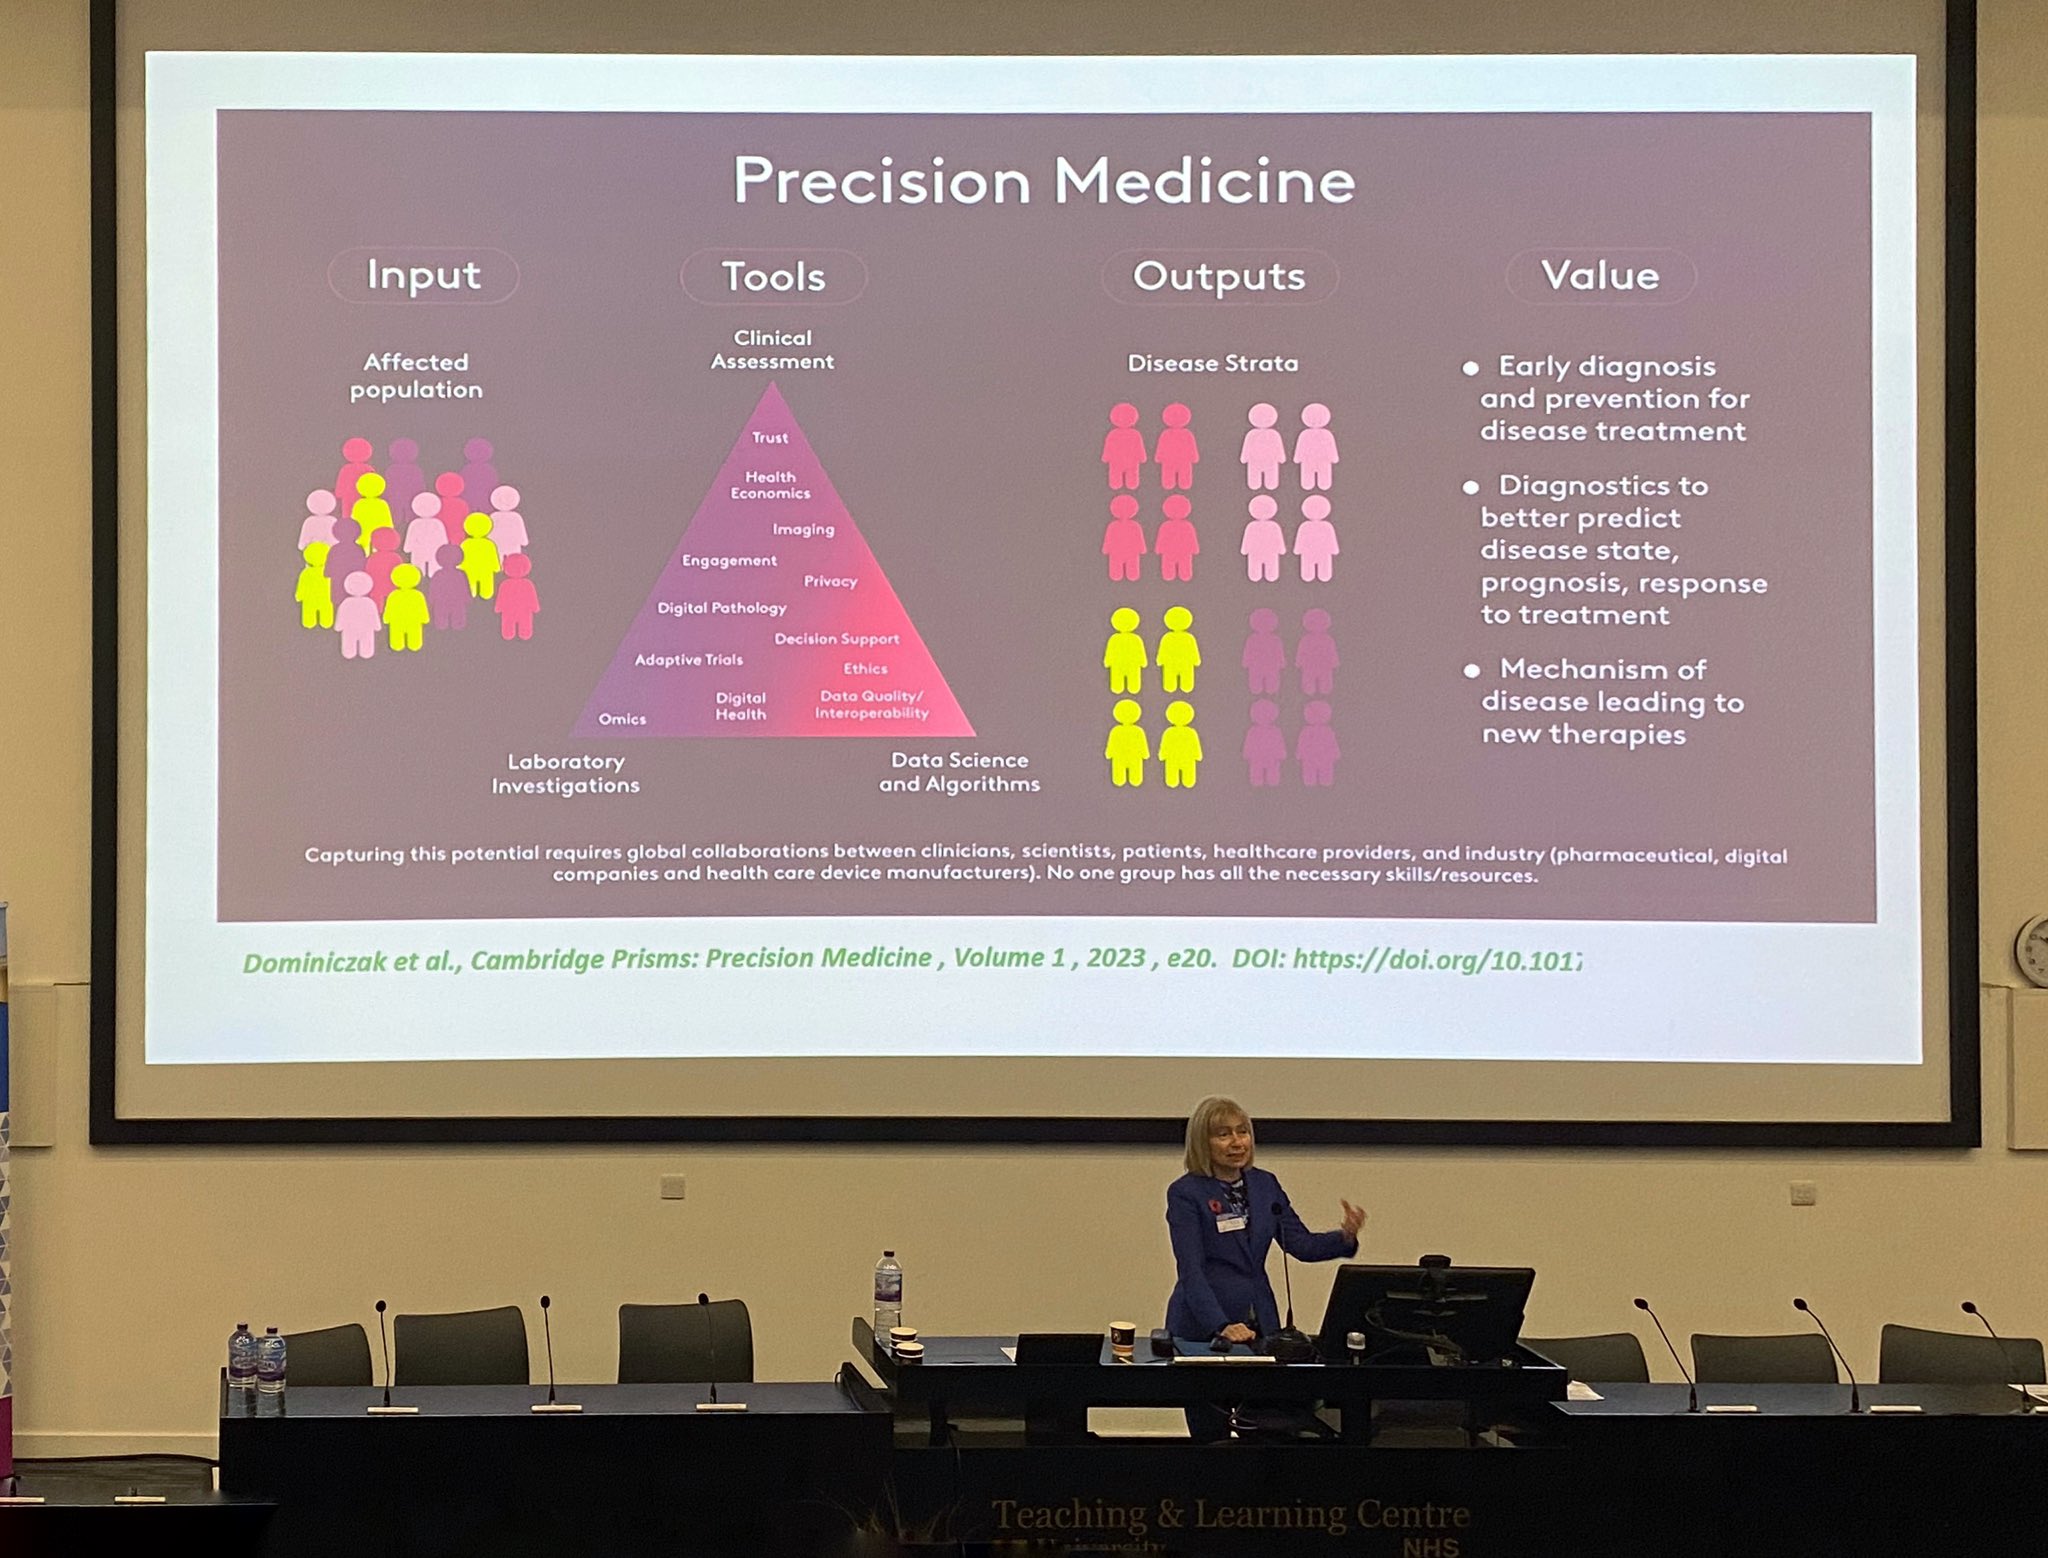 Prof Dame Anna F Dominiczak delivers talk on precision medicine, standing in front of screen depicting the input, tools, output and value of precision medicine. 